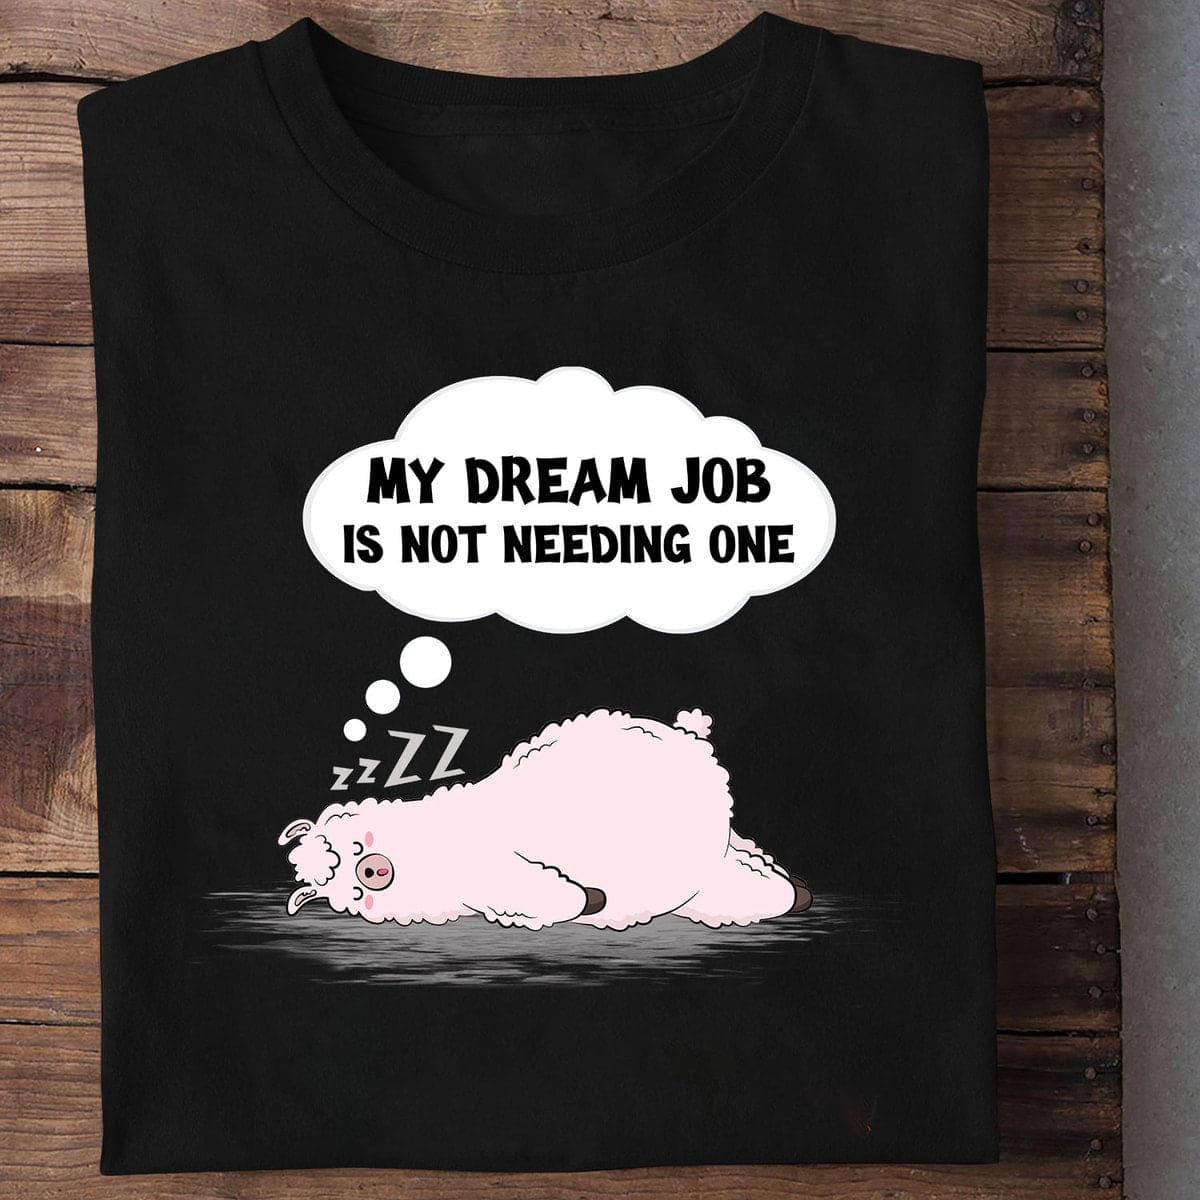 My dream job is not needing one - Gift for lazy people, sleeping white llama